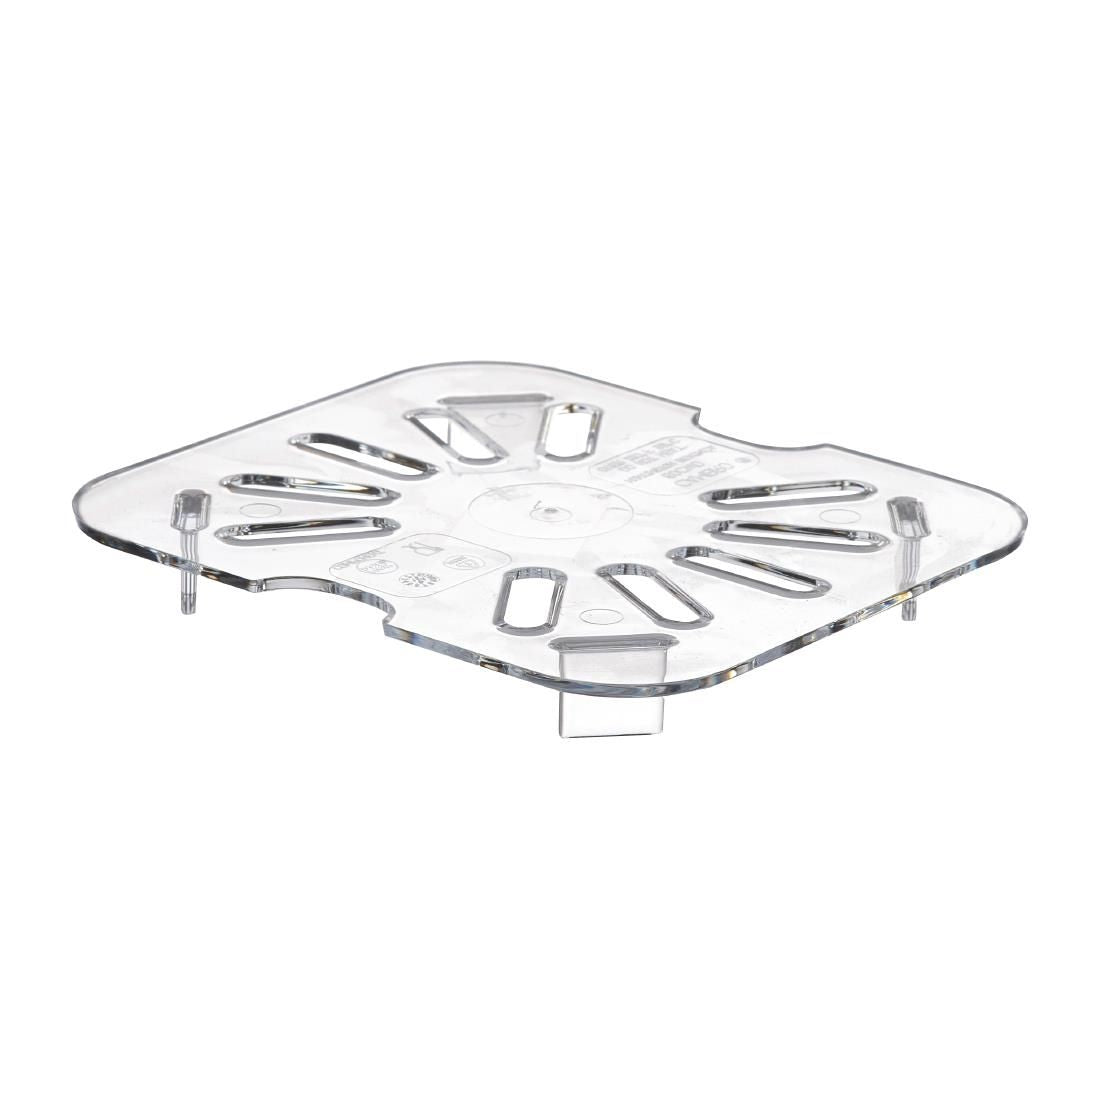 DM755 Cambro Polycarbonate 1/6 Gastronorm Pan Drain Shelf JD Catering Equipment Solutions Ltd